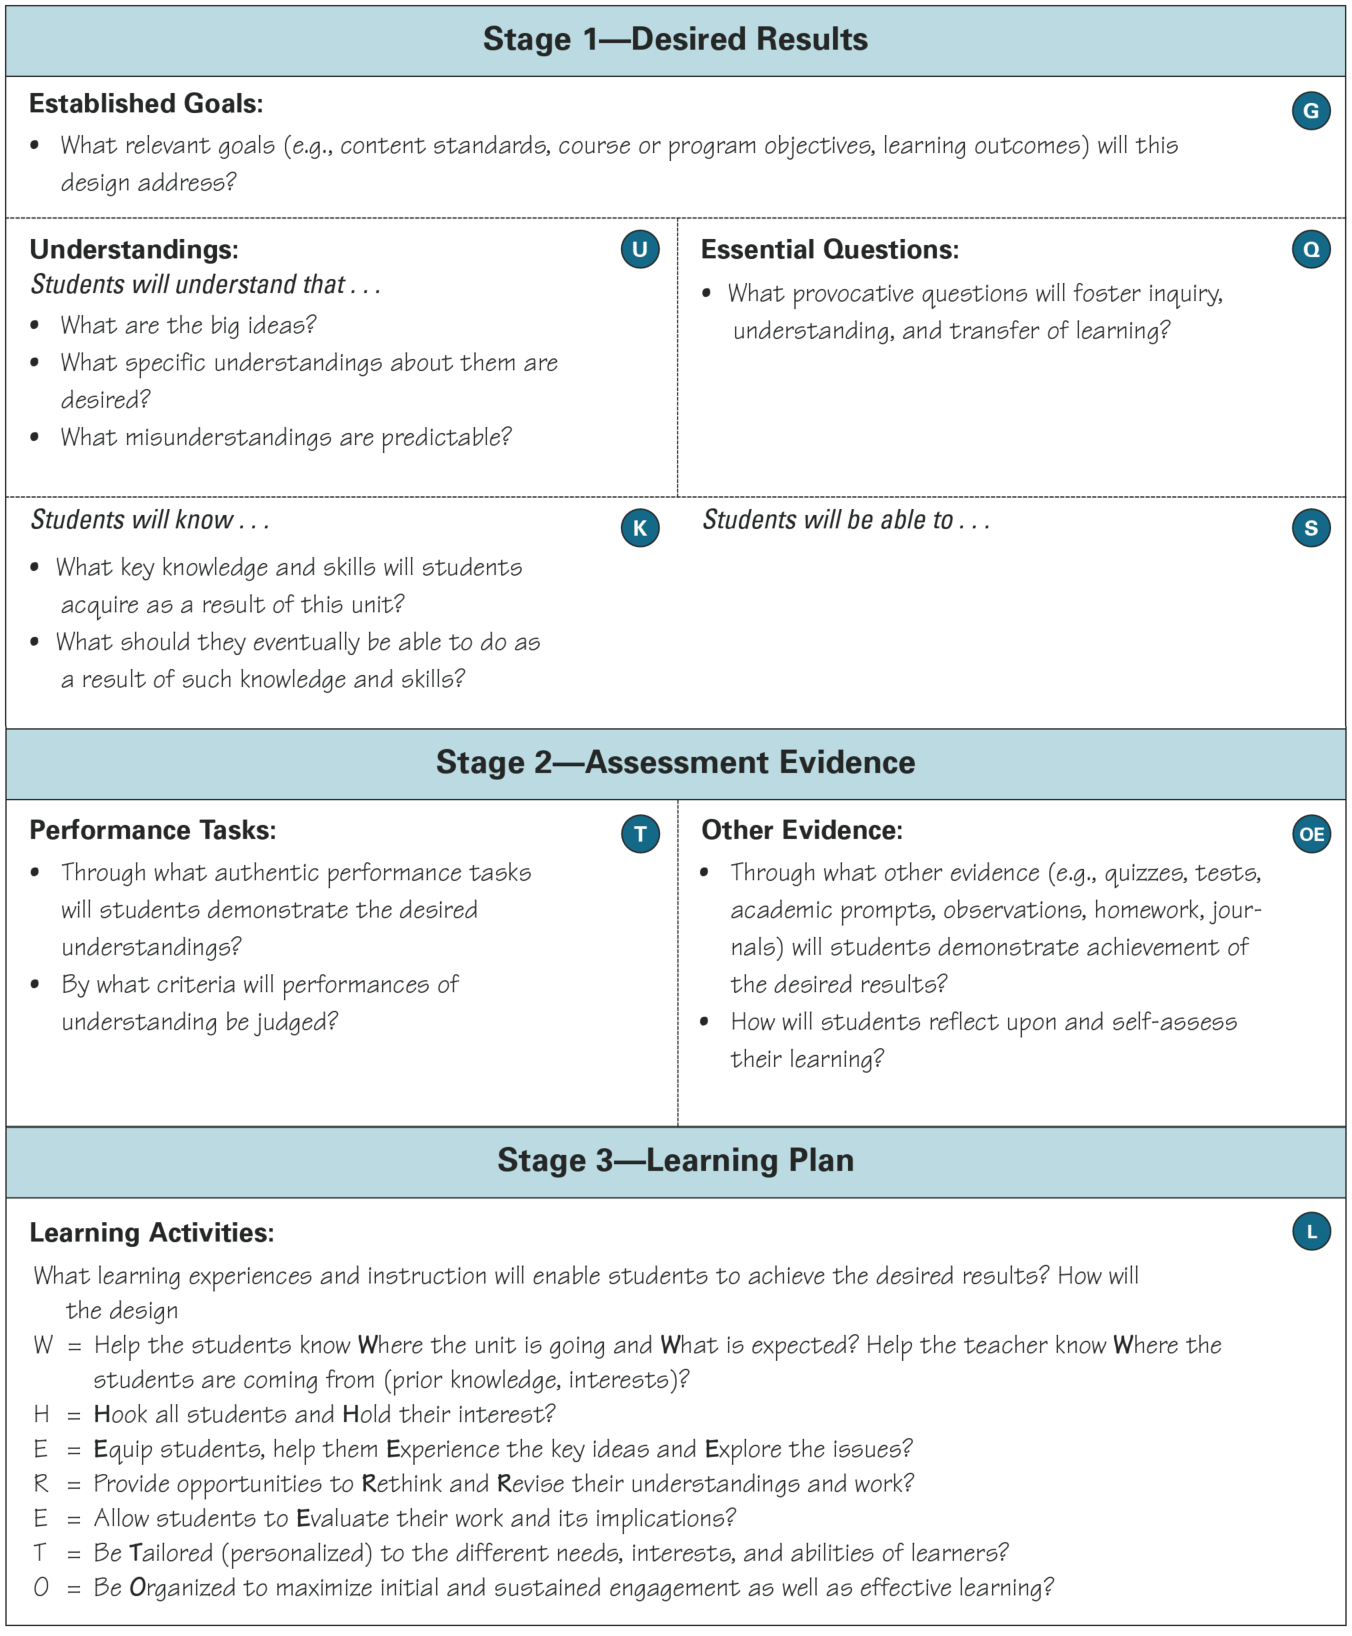 Figure 2: 1-Page Template with Design Questions for Teachers (Wiggins & McTighe, 2005)